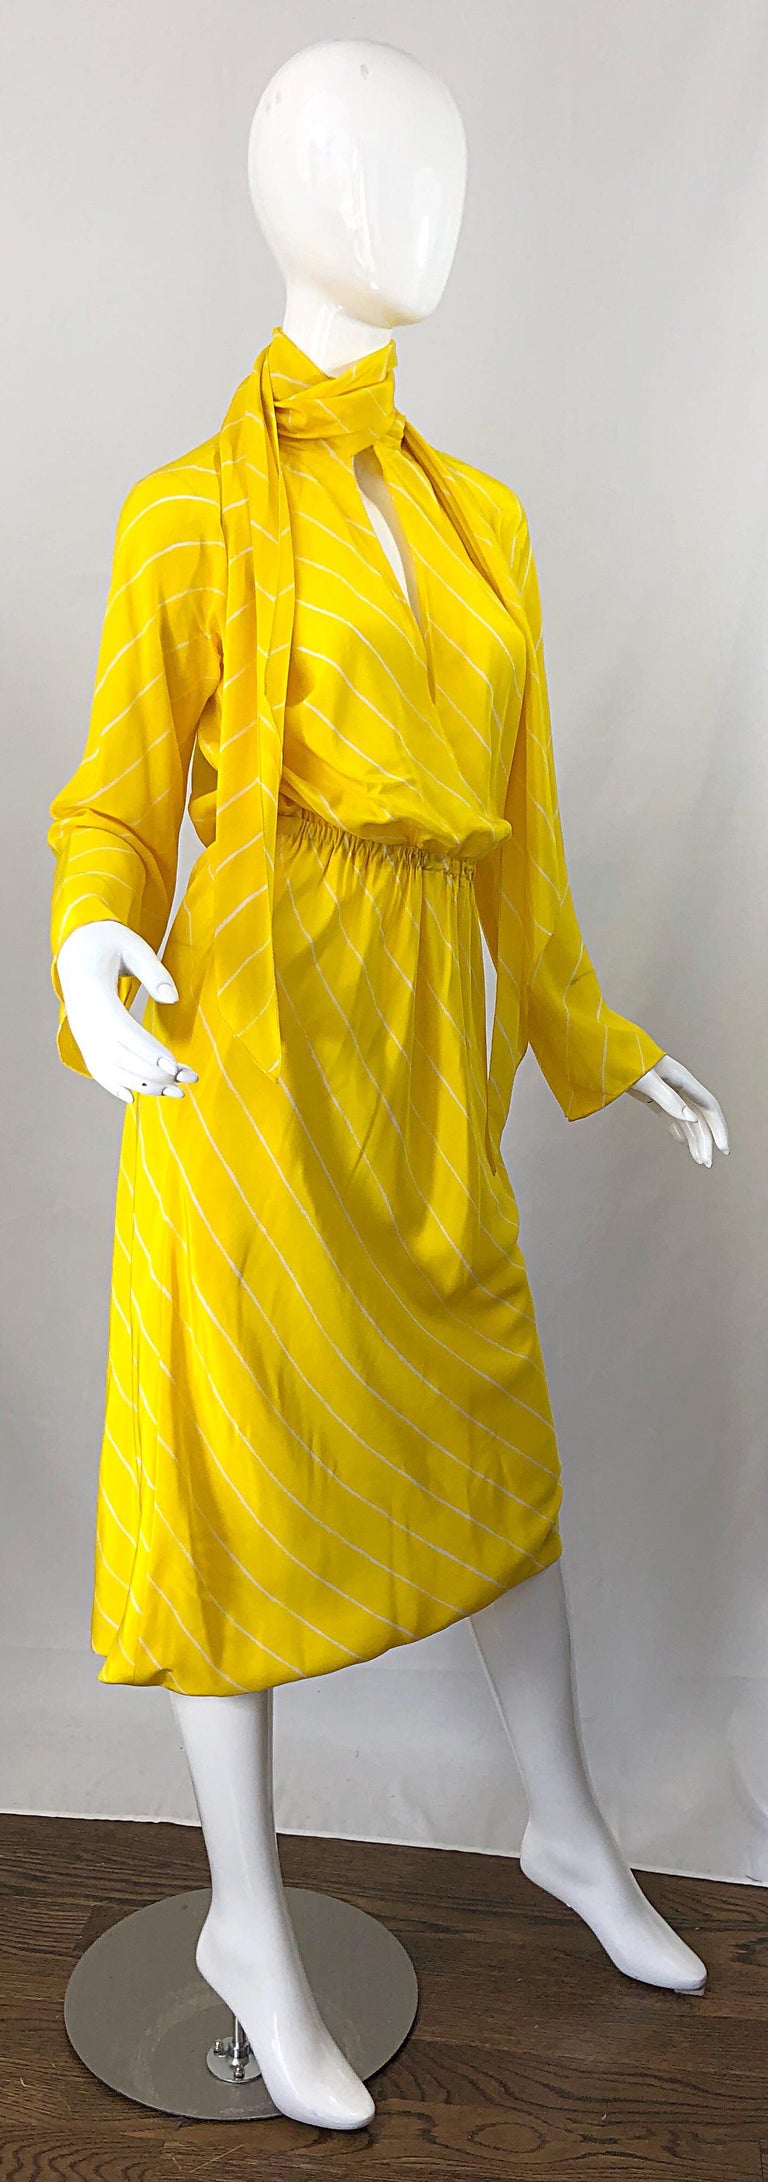 1970s Halston Canary Yellow + White Chevron Striped Bell Sleeve 70s Scarf Dress For Sale 7